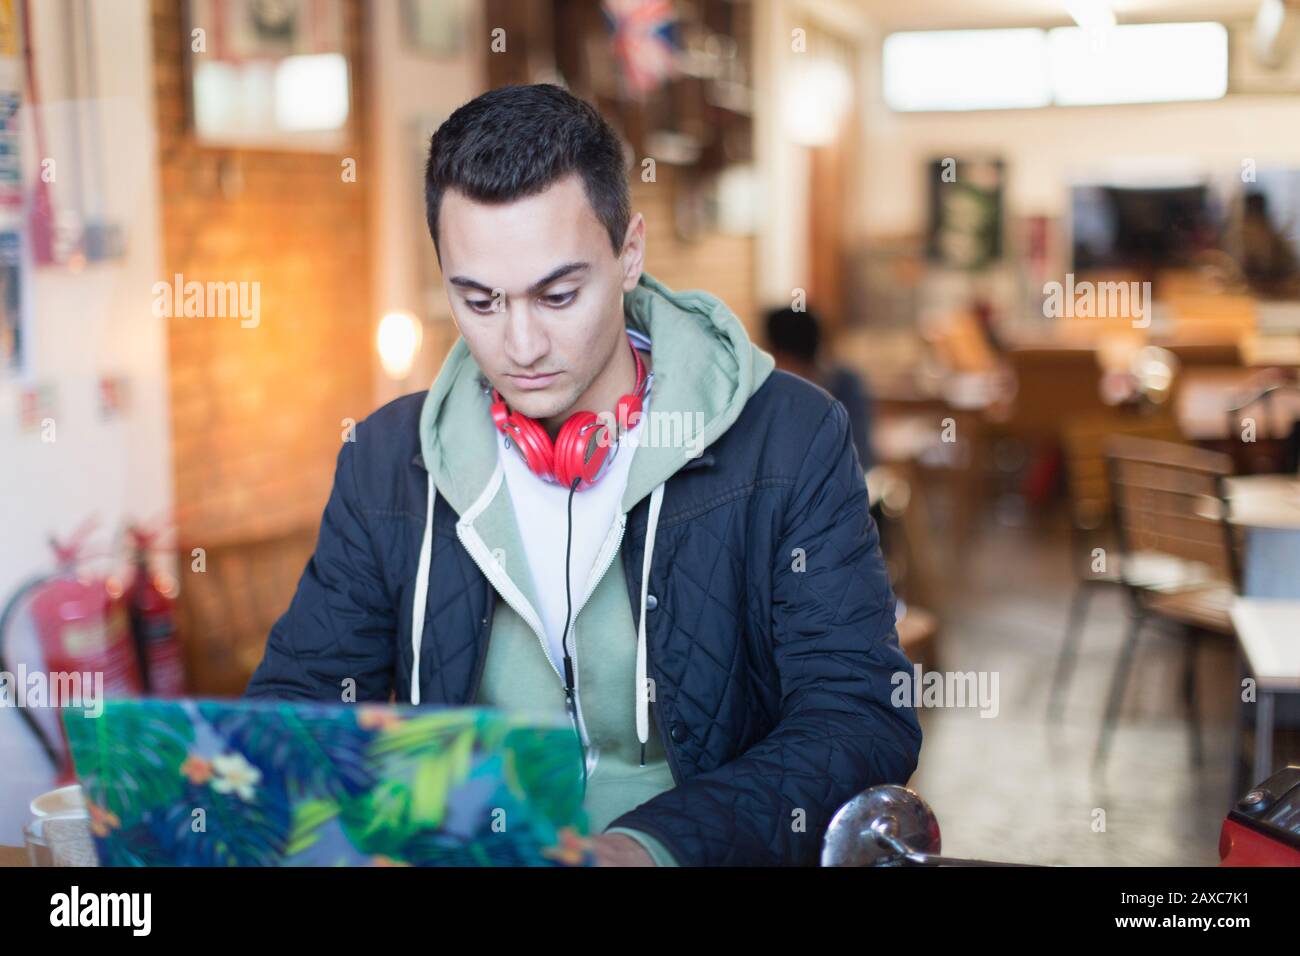 Focused young male college student studying at laptop in cafe window Stock Photo